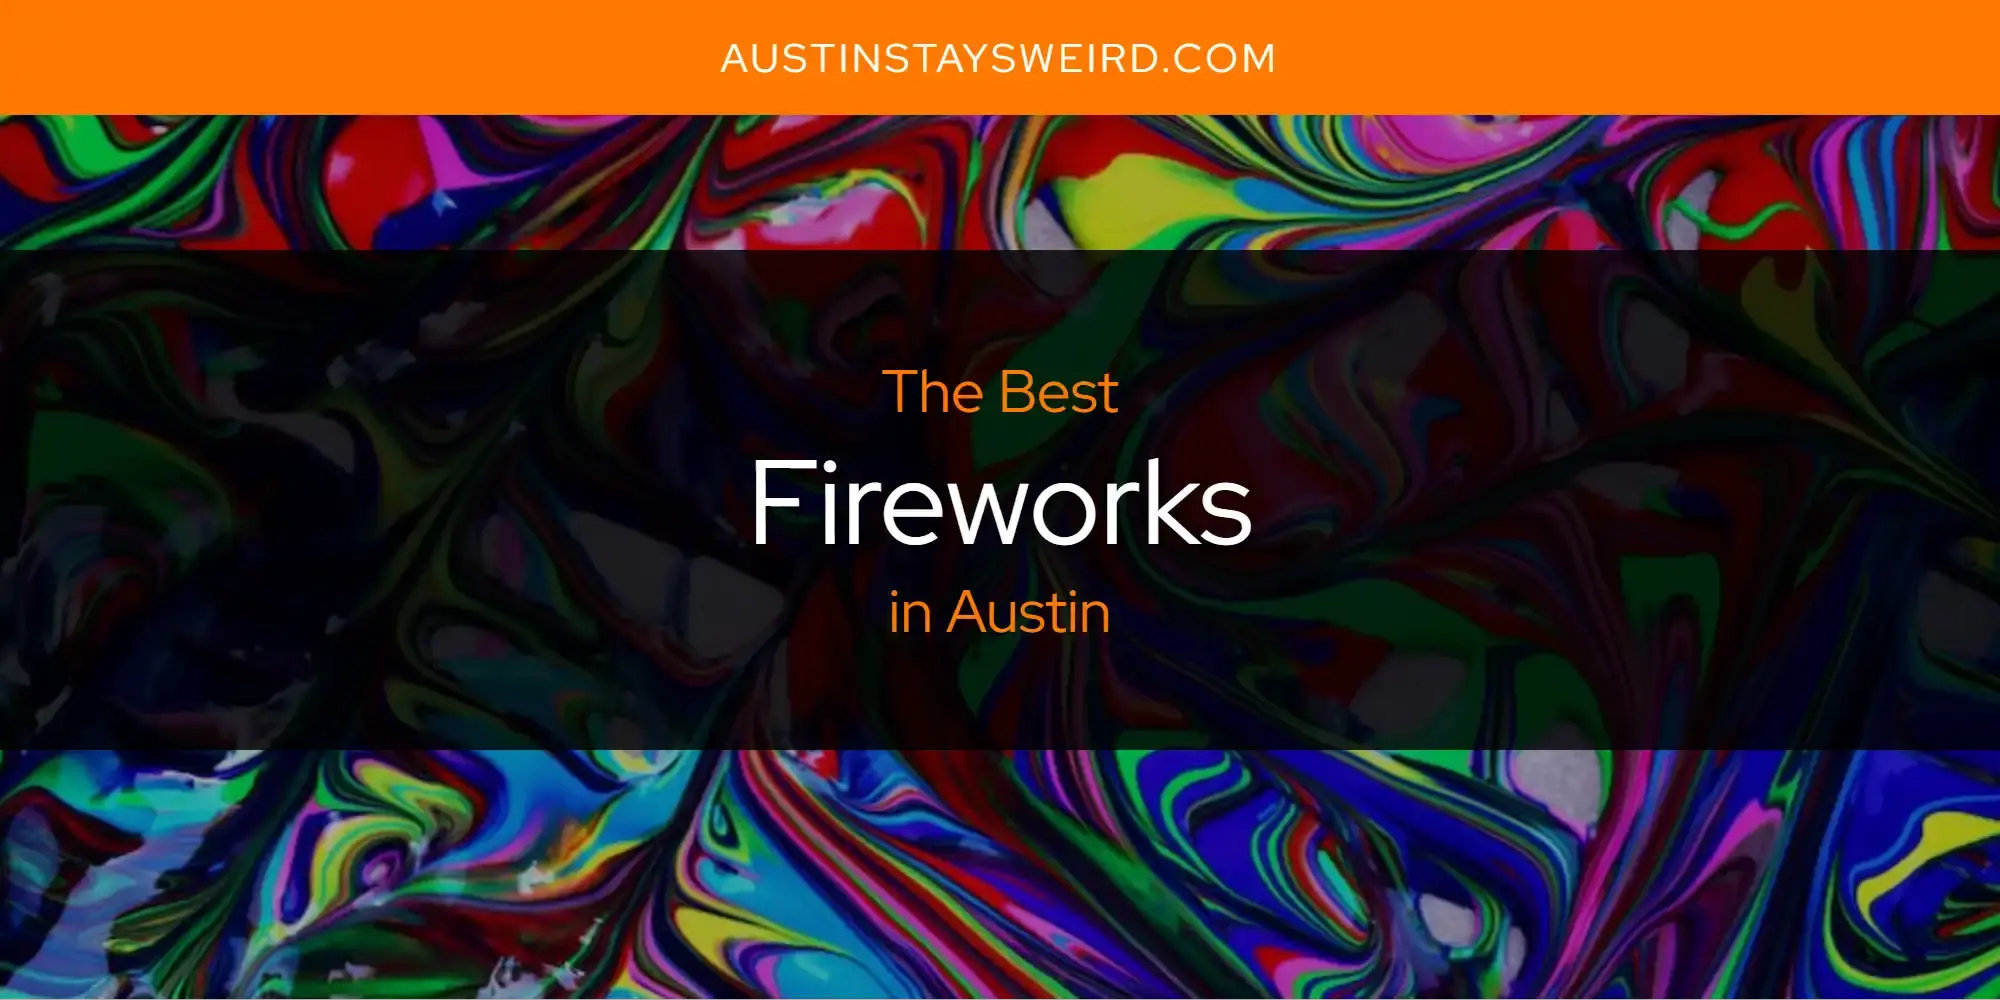 Best Fireworks in Austin? Here's the Top 8